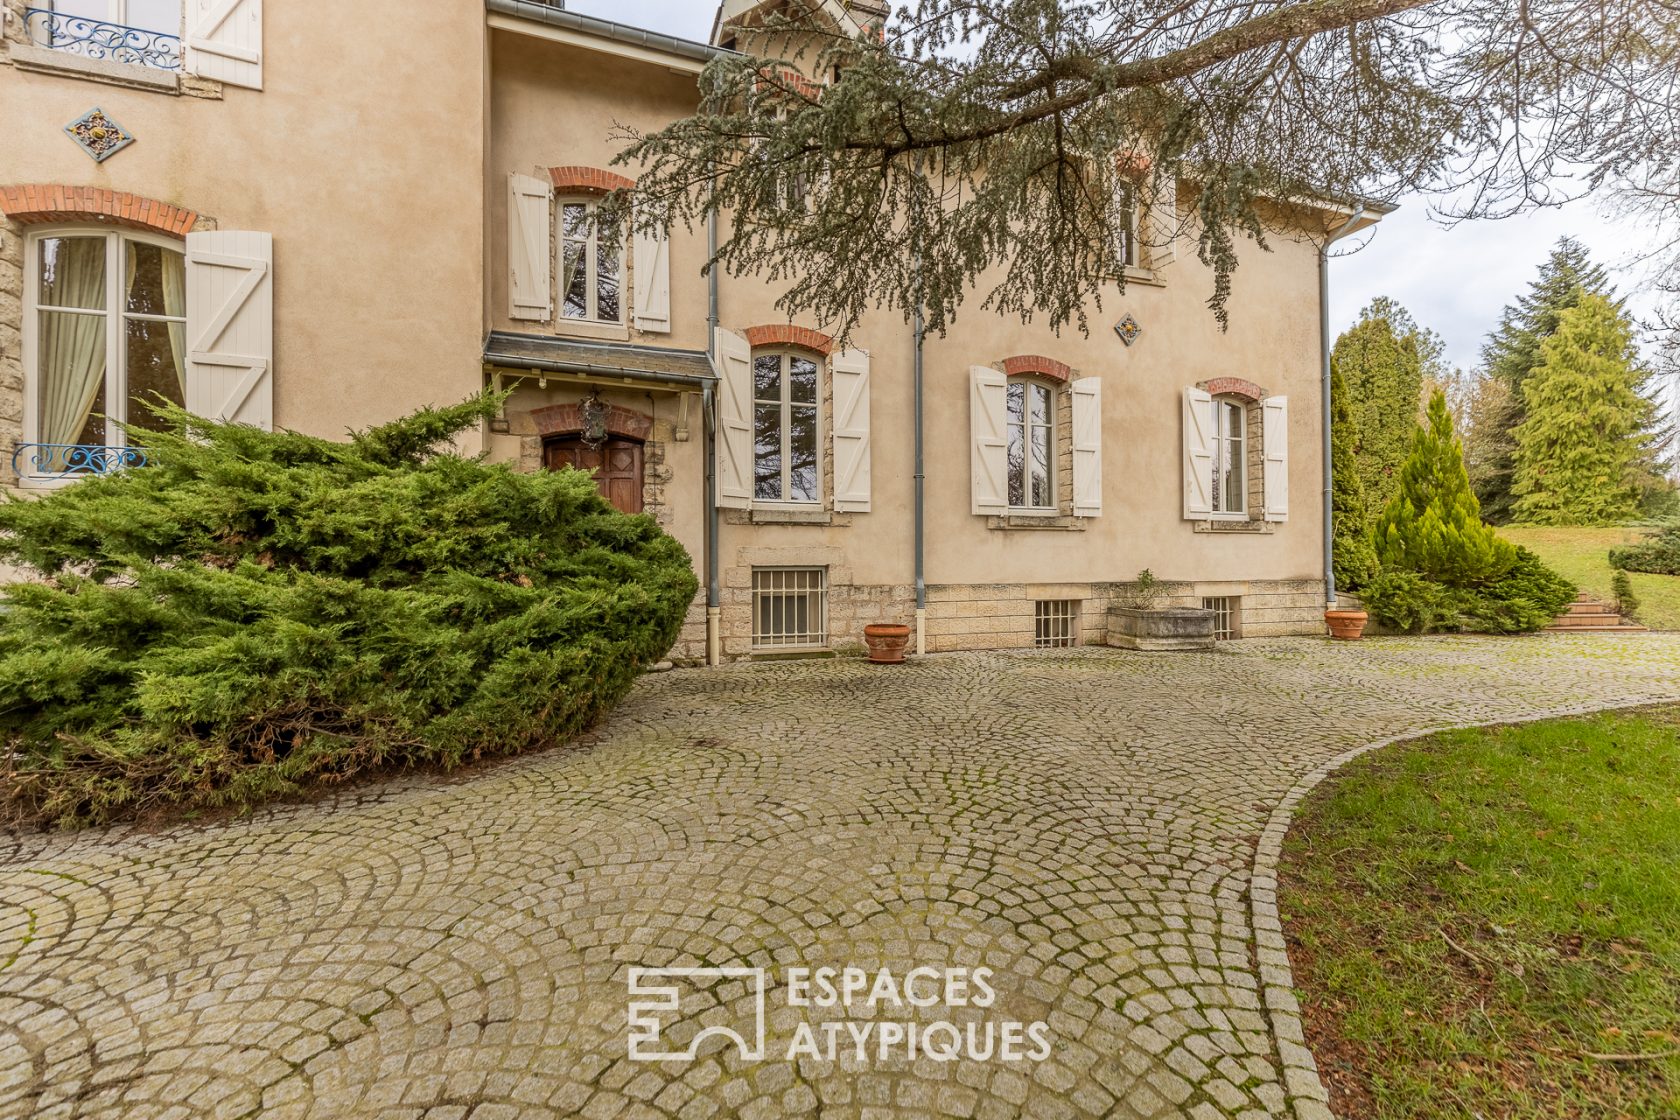 Bourgeois-style house with wooded parklands, indoor swimming pool and tennis court